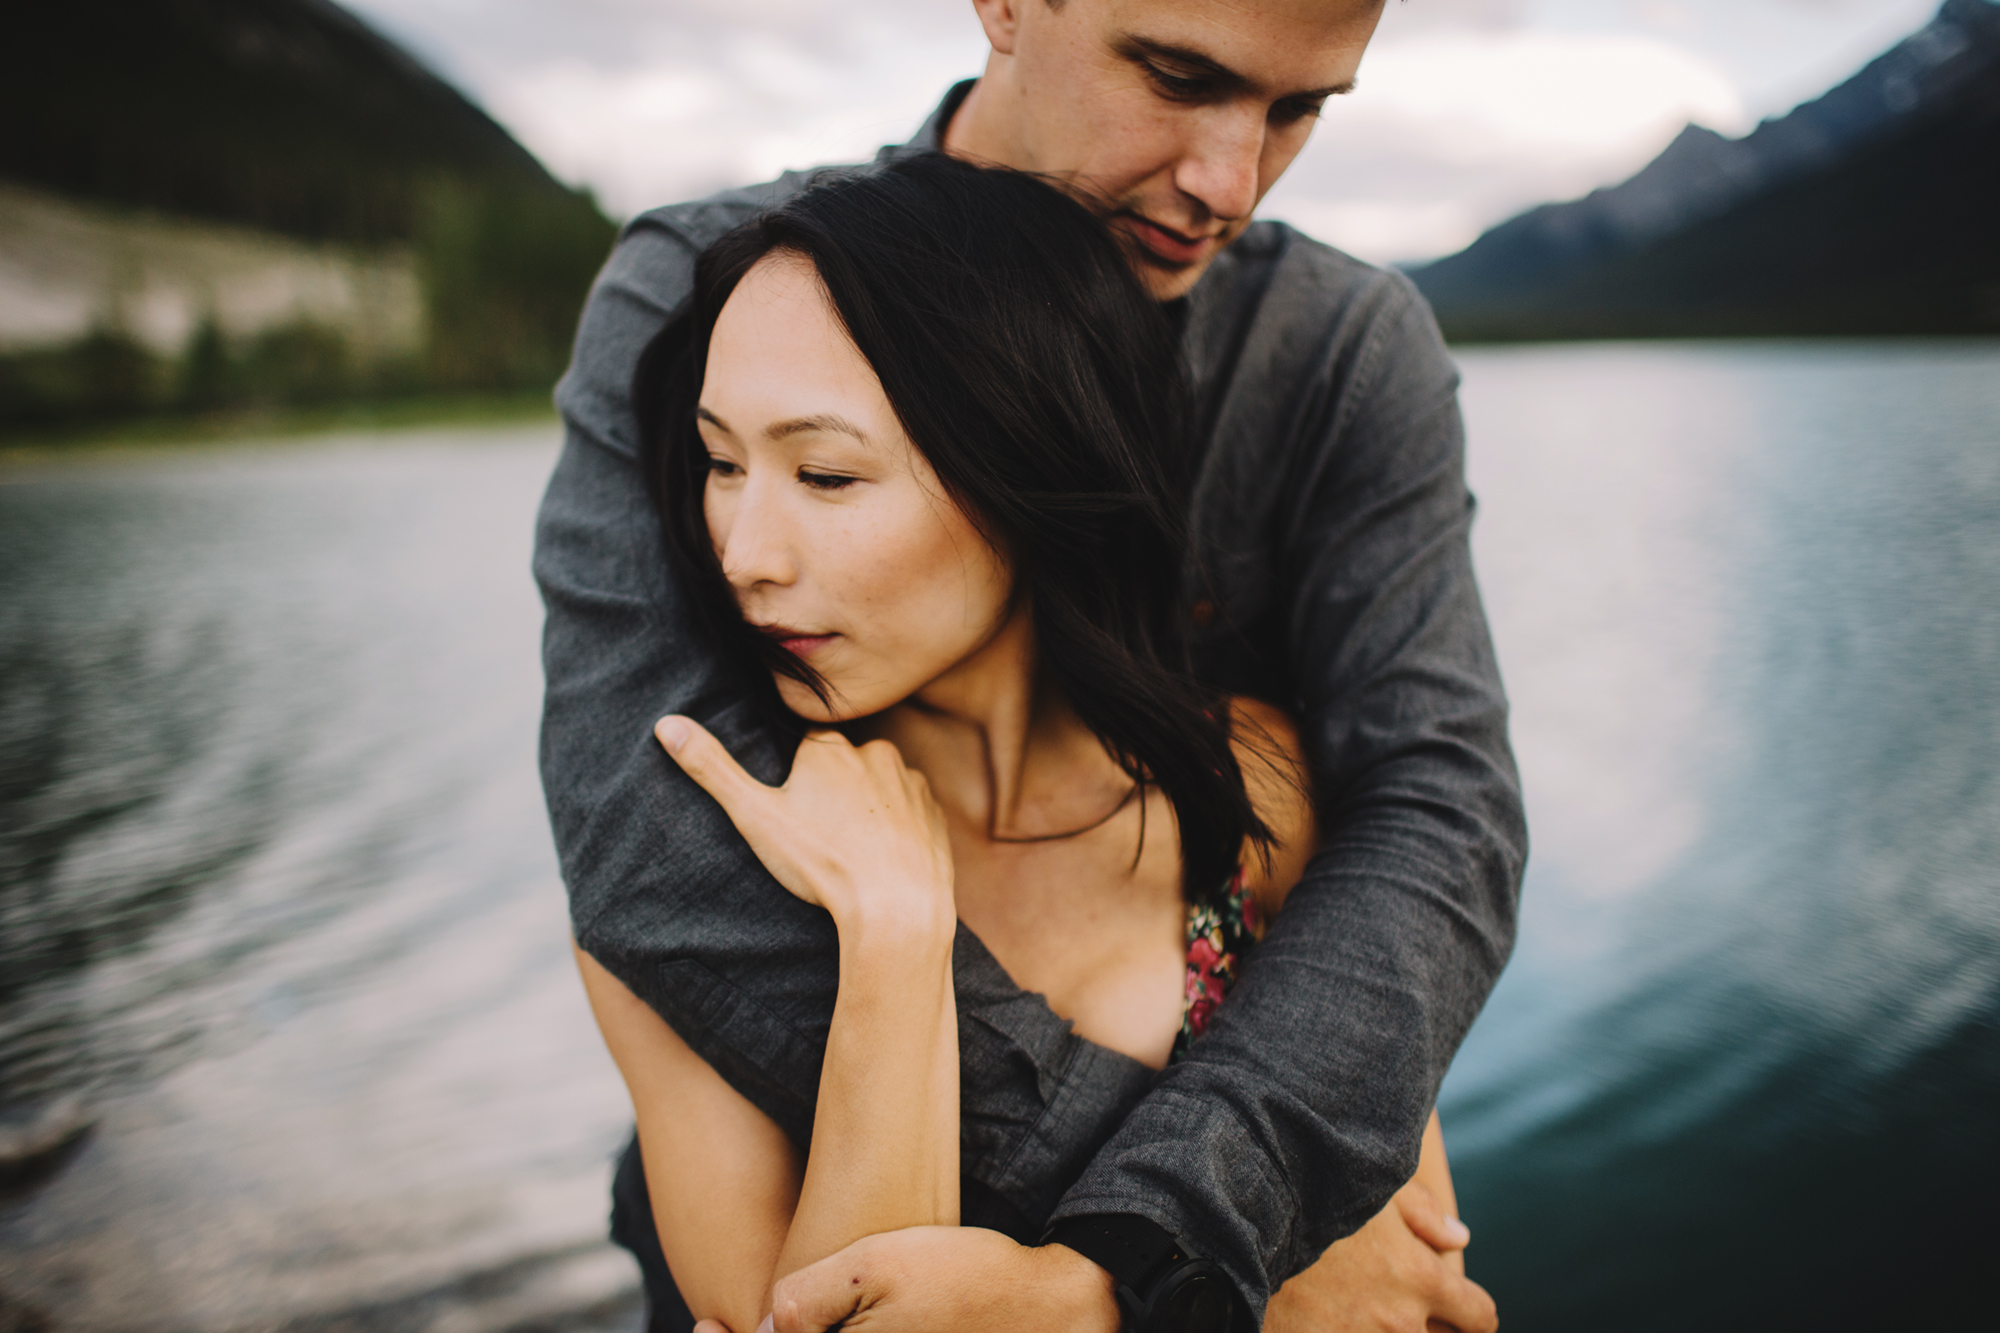 Mandy + Wes - Canmore, Alberta